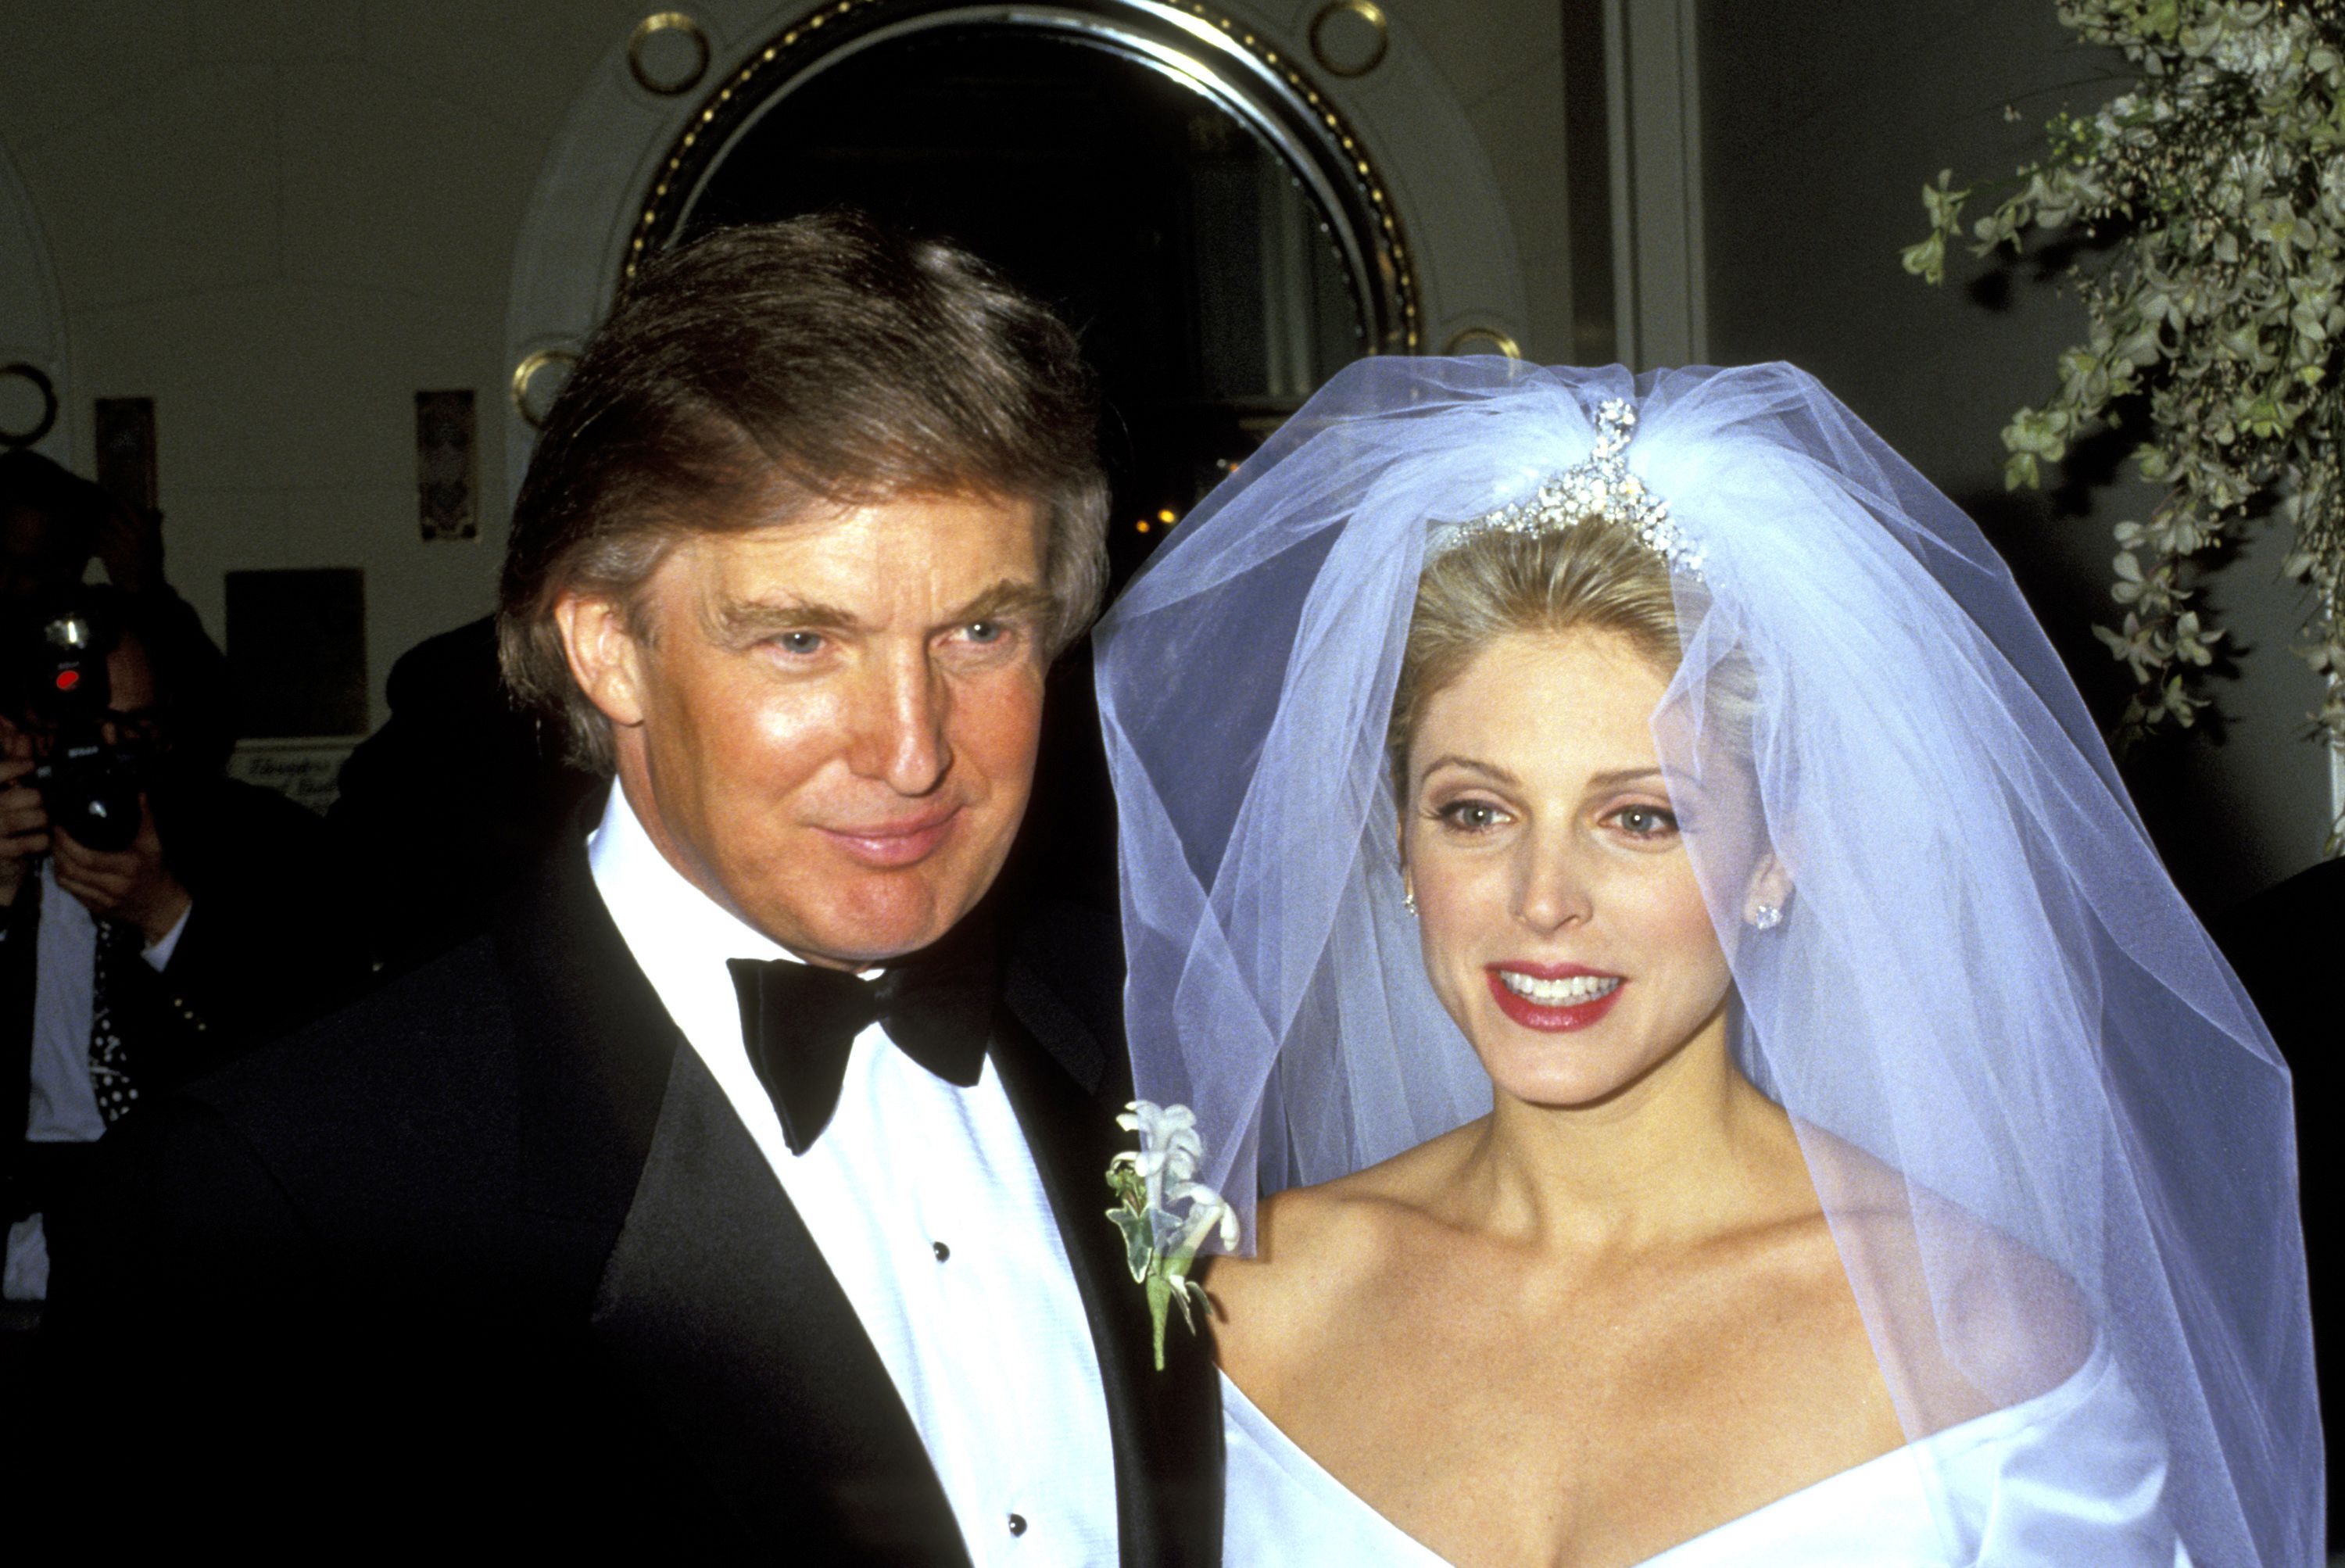 Marla Maples and Donald Trump at their wedding at the Plaza Hotel in 1983 | Source: Getty Images